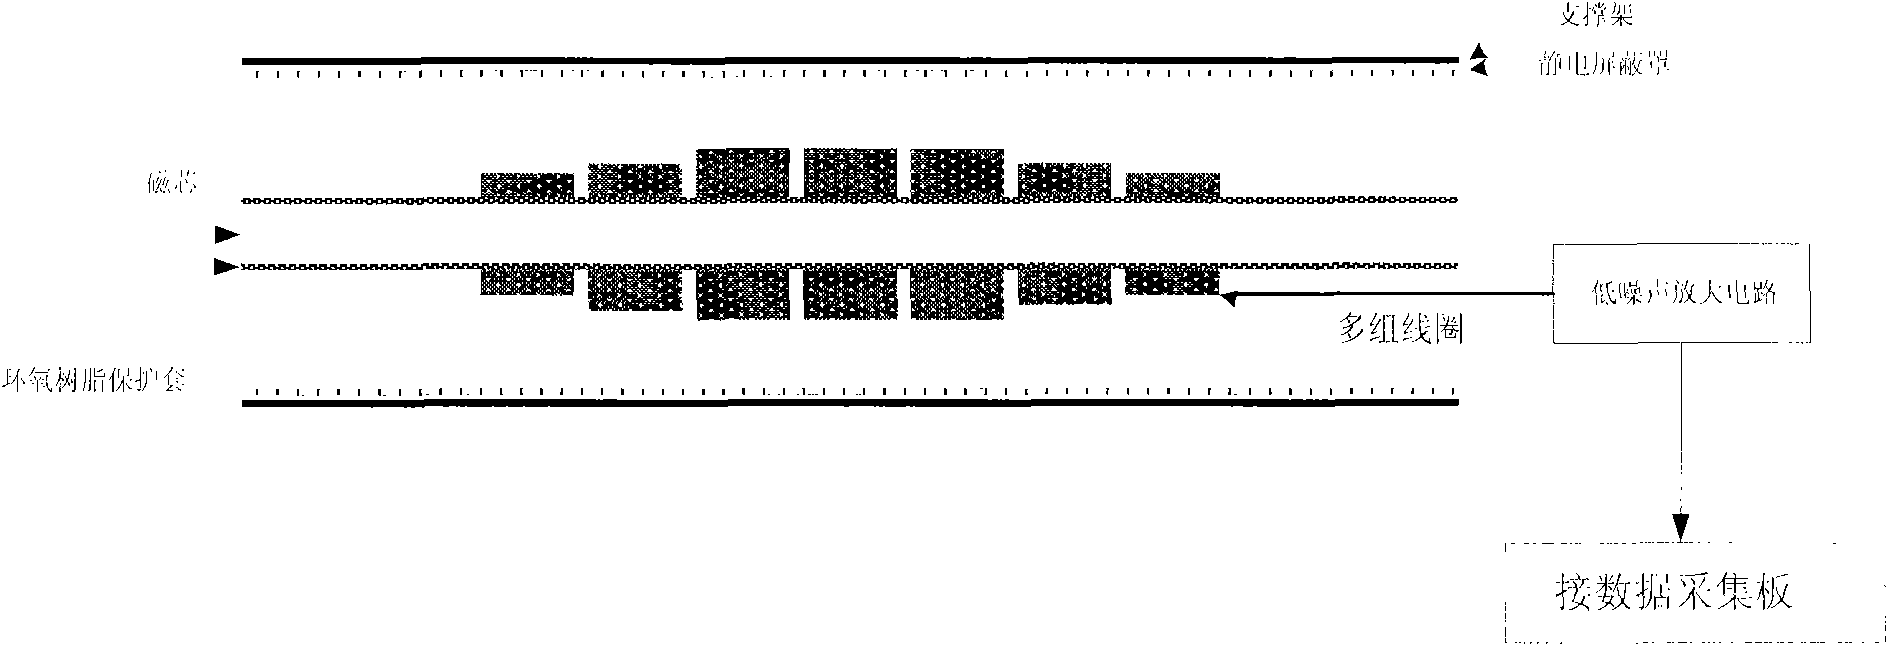 Invention of inductive magnetic sensor used for superficial layer CSAMT (controlled source acoustic magnetotelluric) method